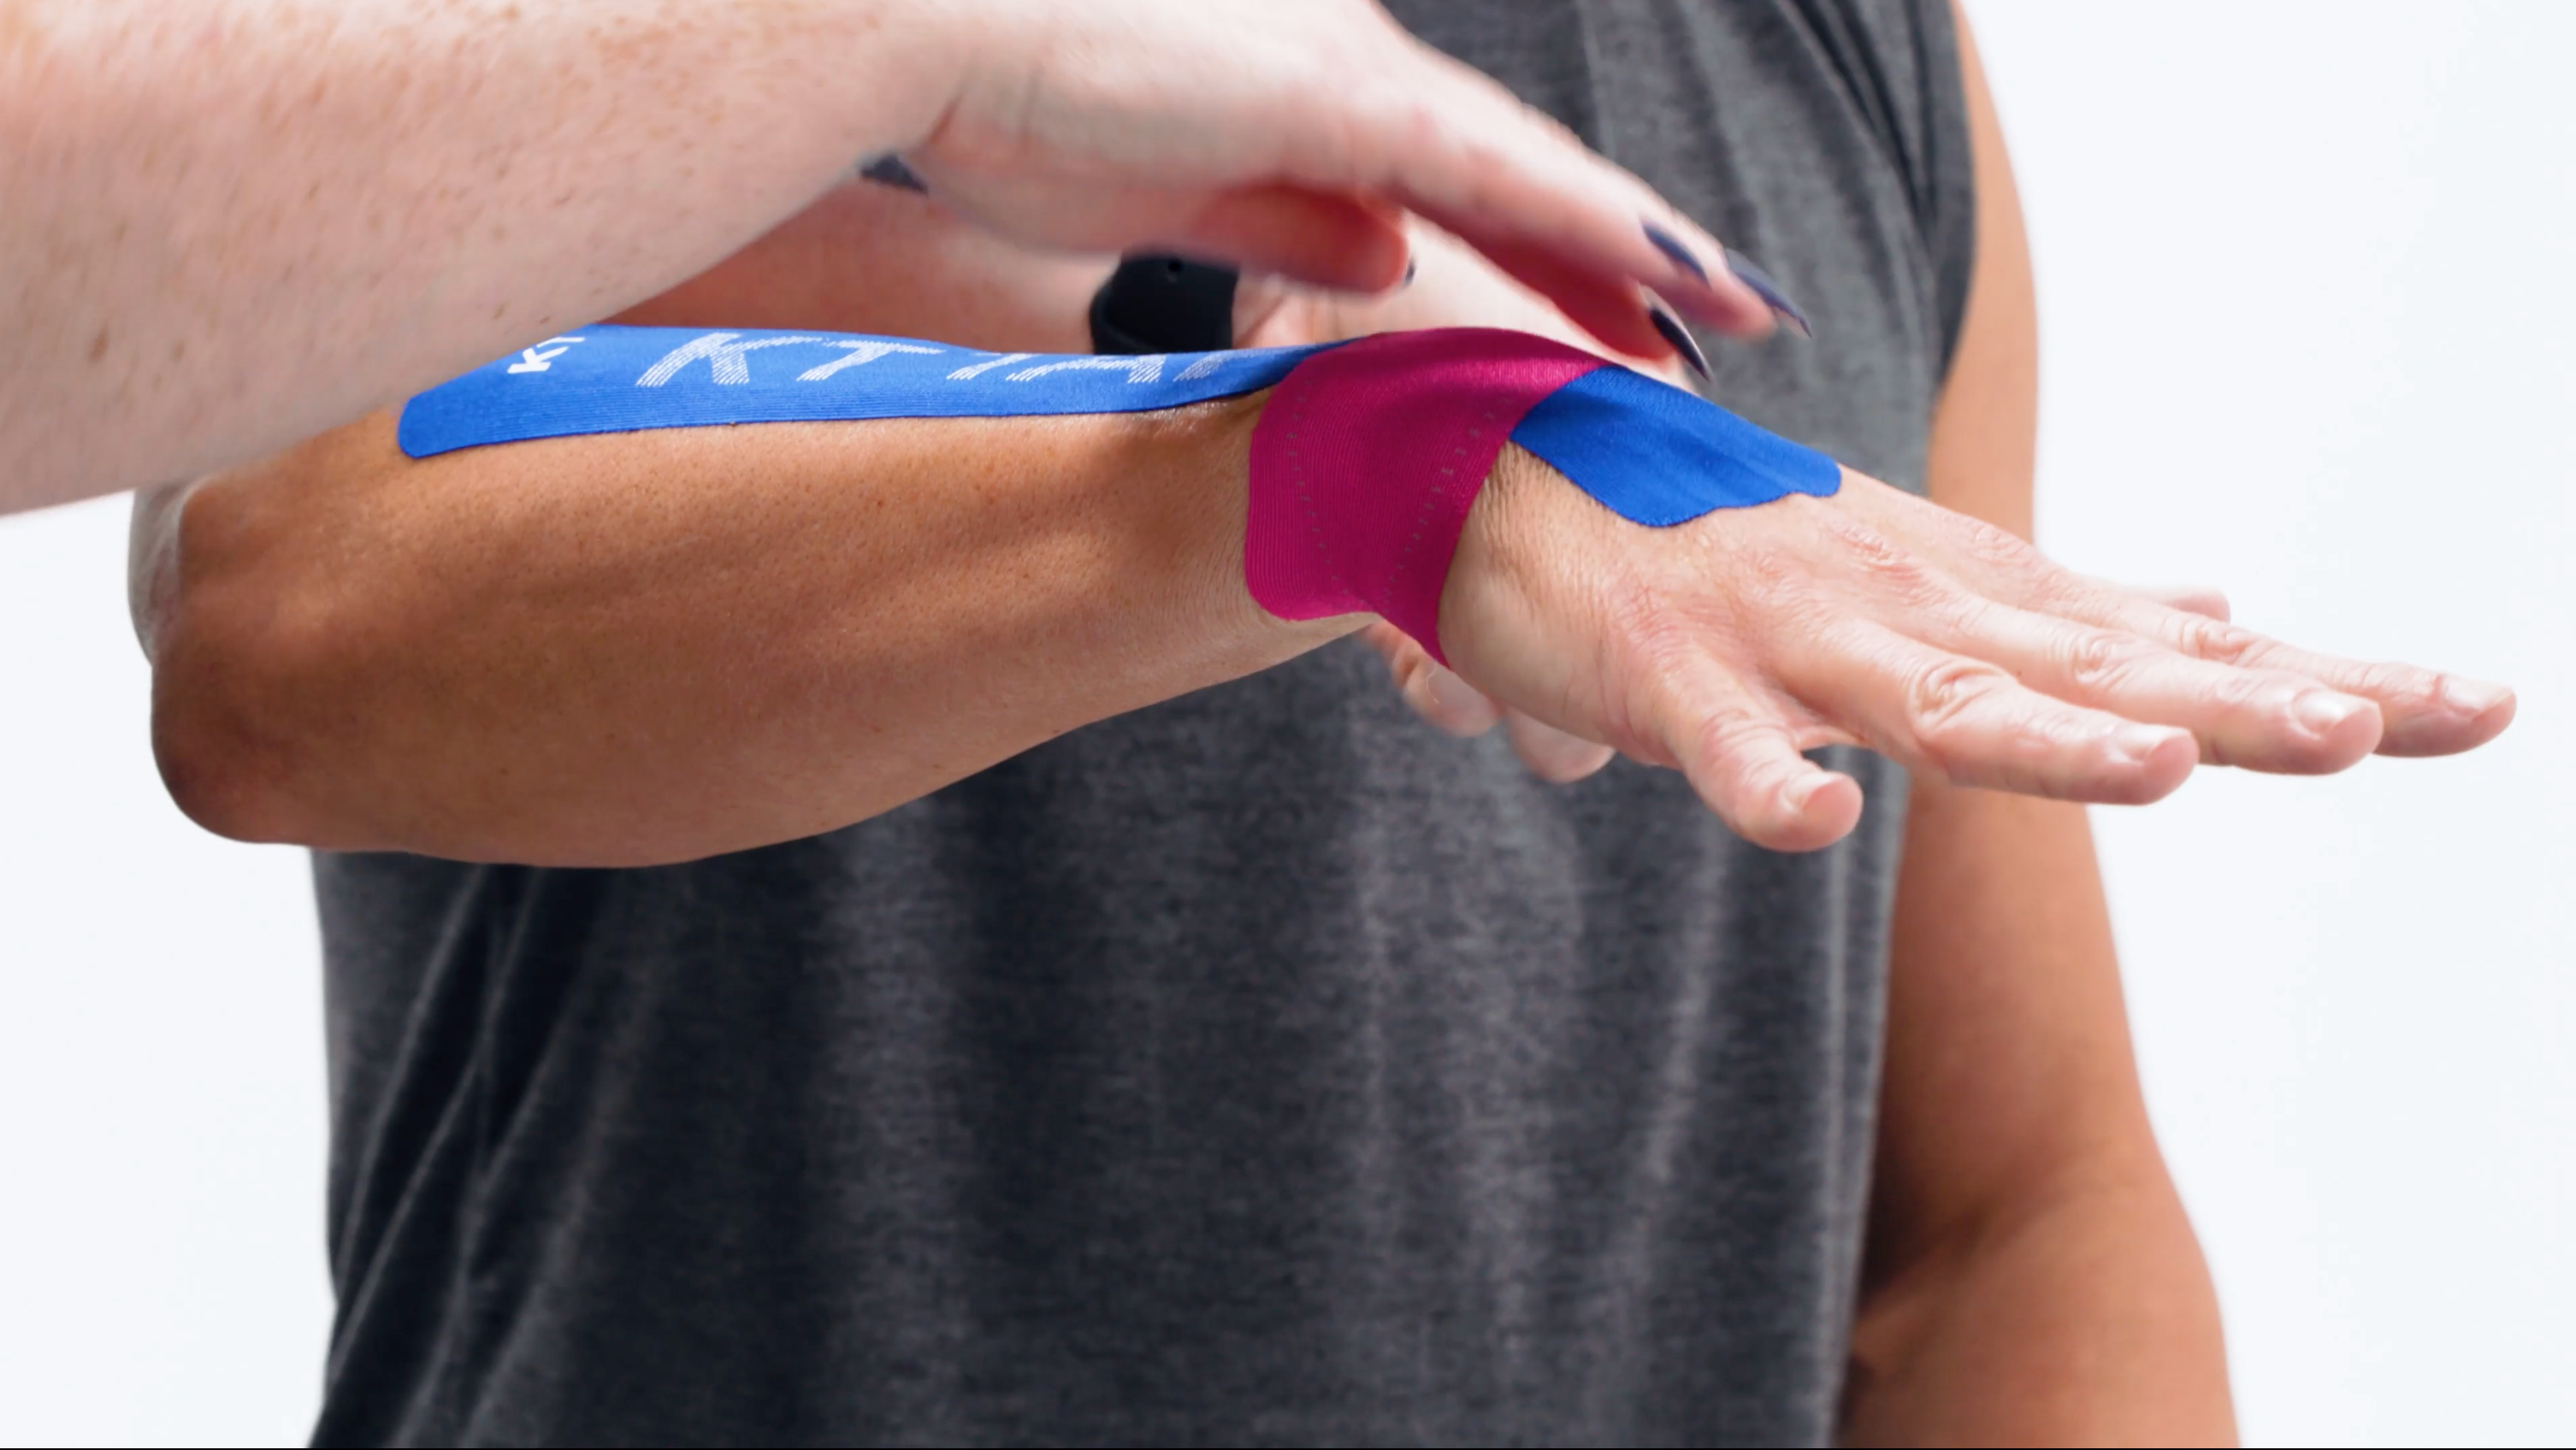 KT Tape Applications for Shoulders, Shin Splints, and Wrists